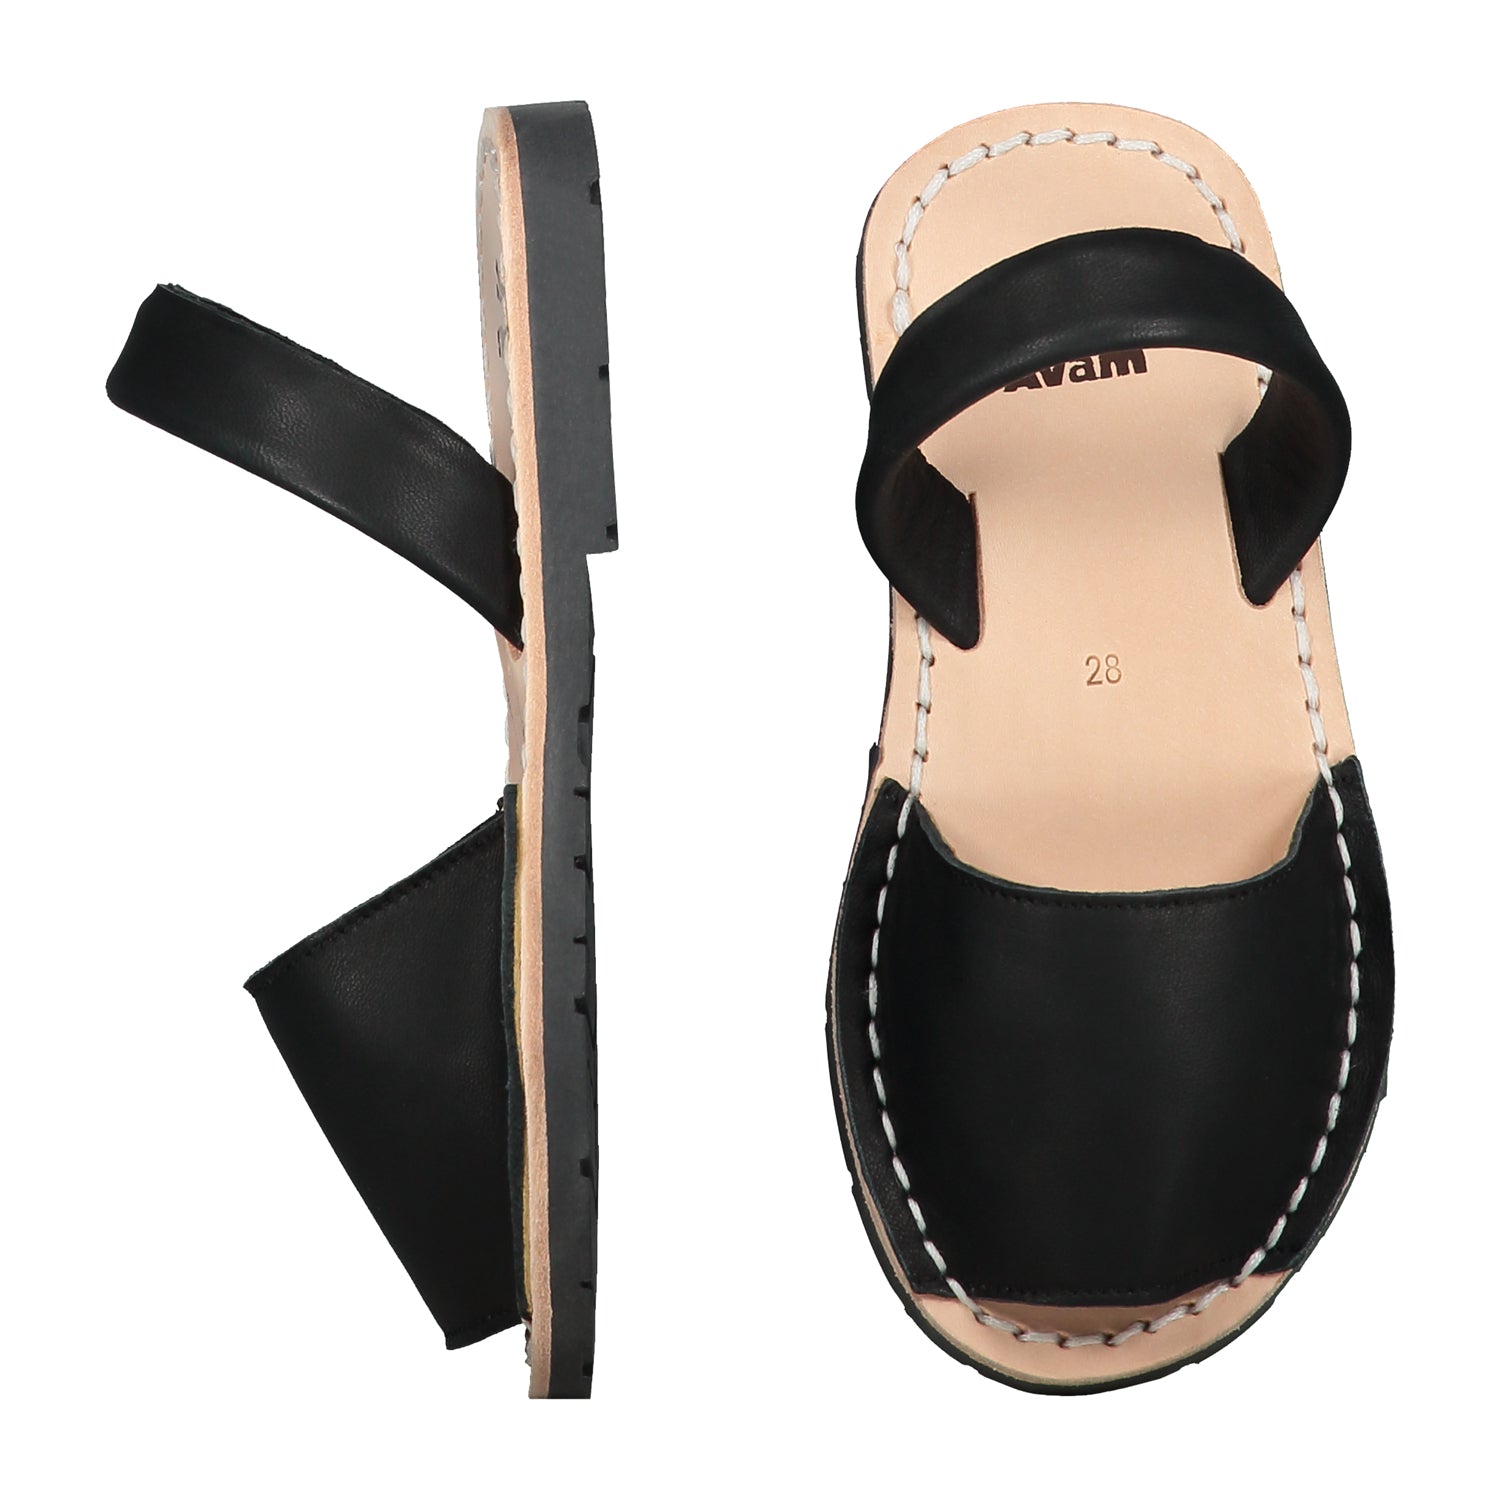 Sandals by S'Avams Olso Black